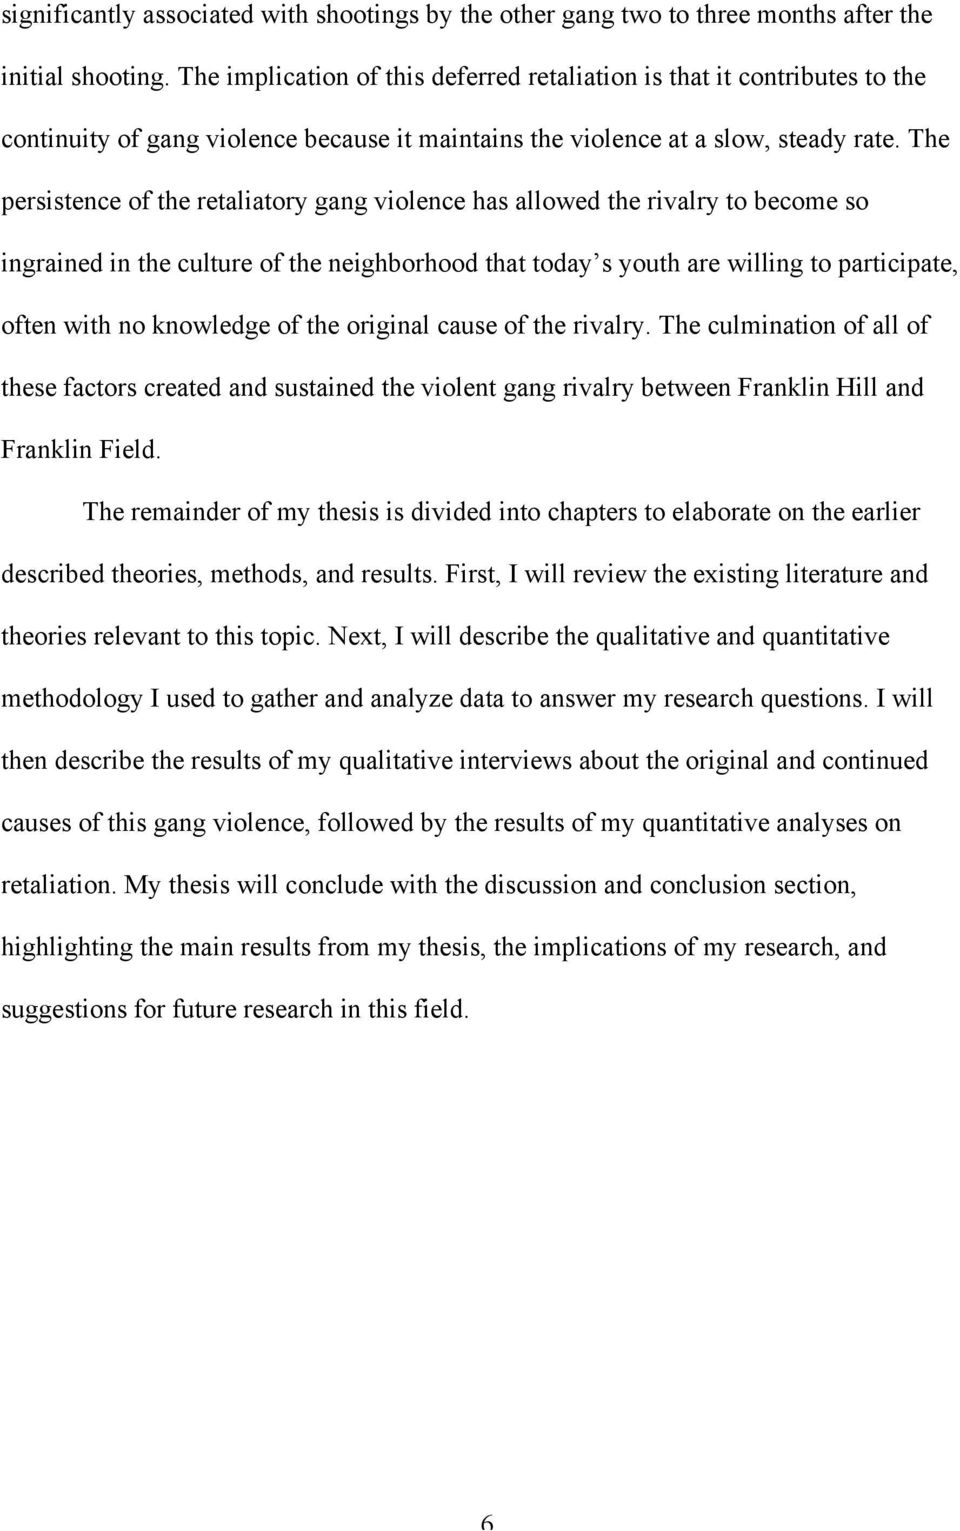 Examples Of A Graduate School Essay For Pschology